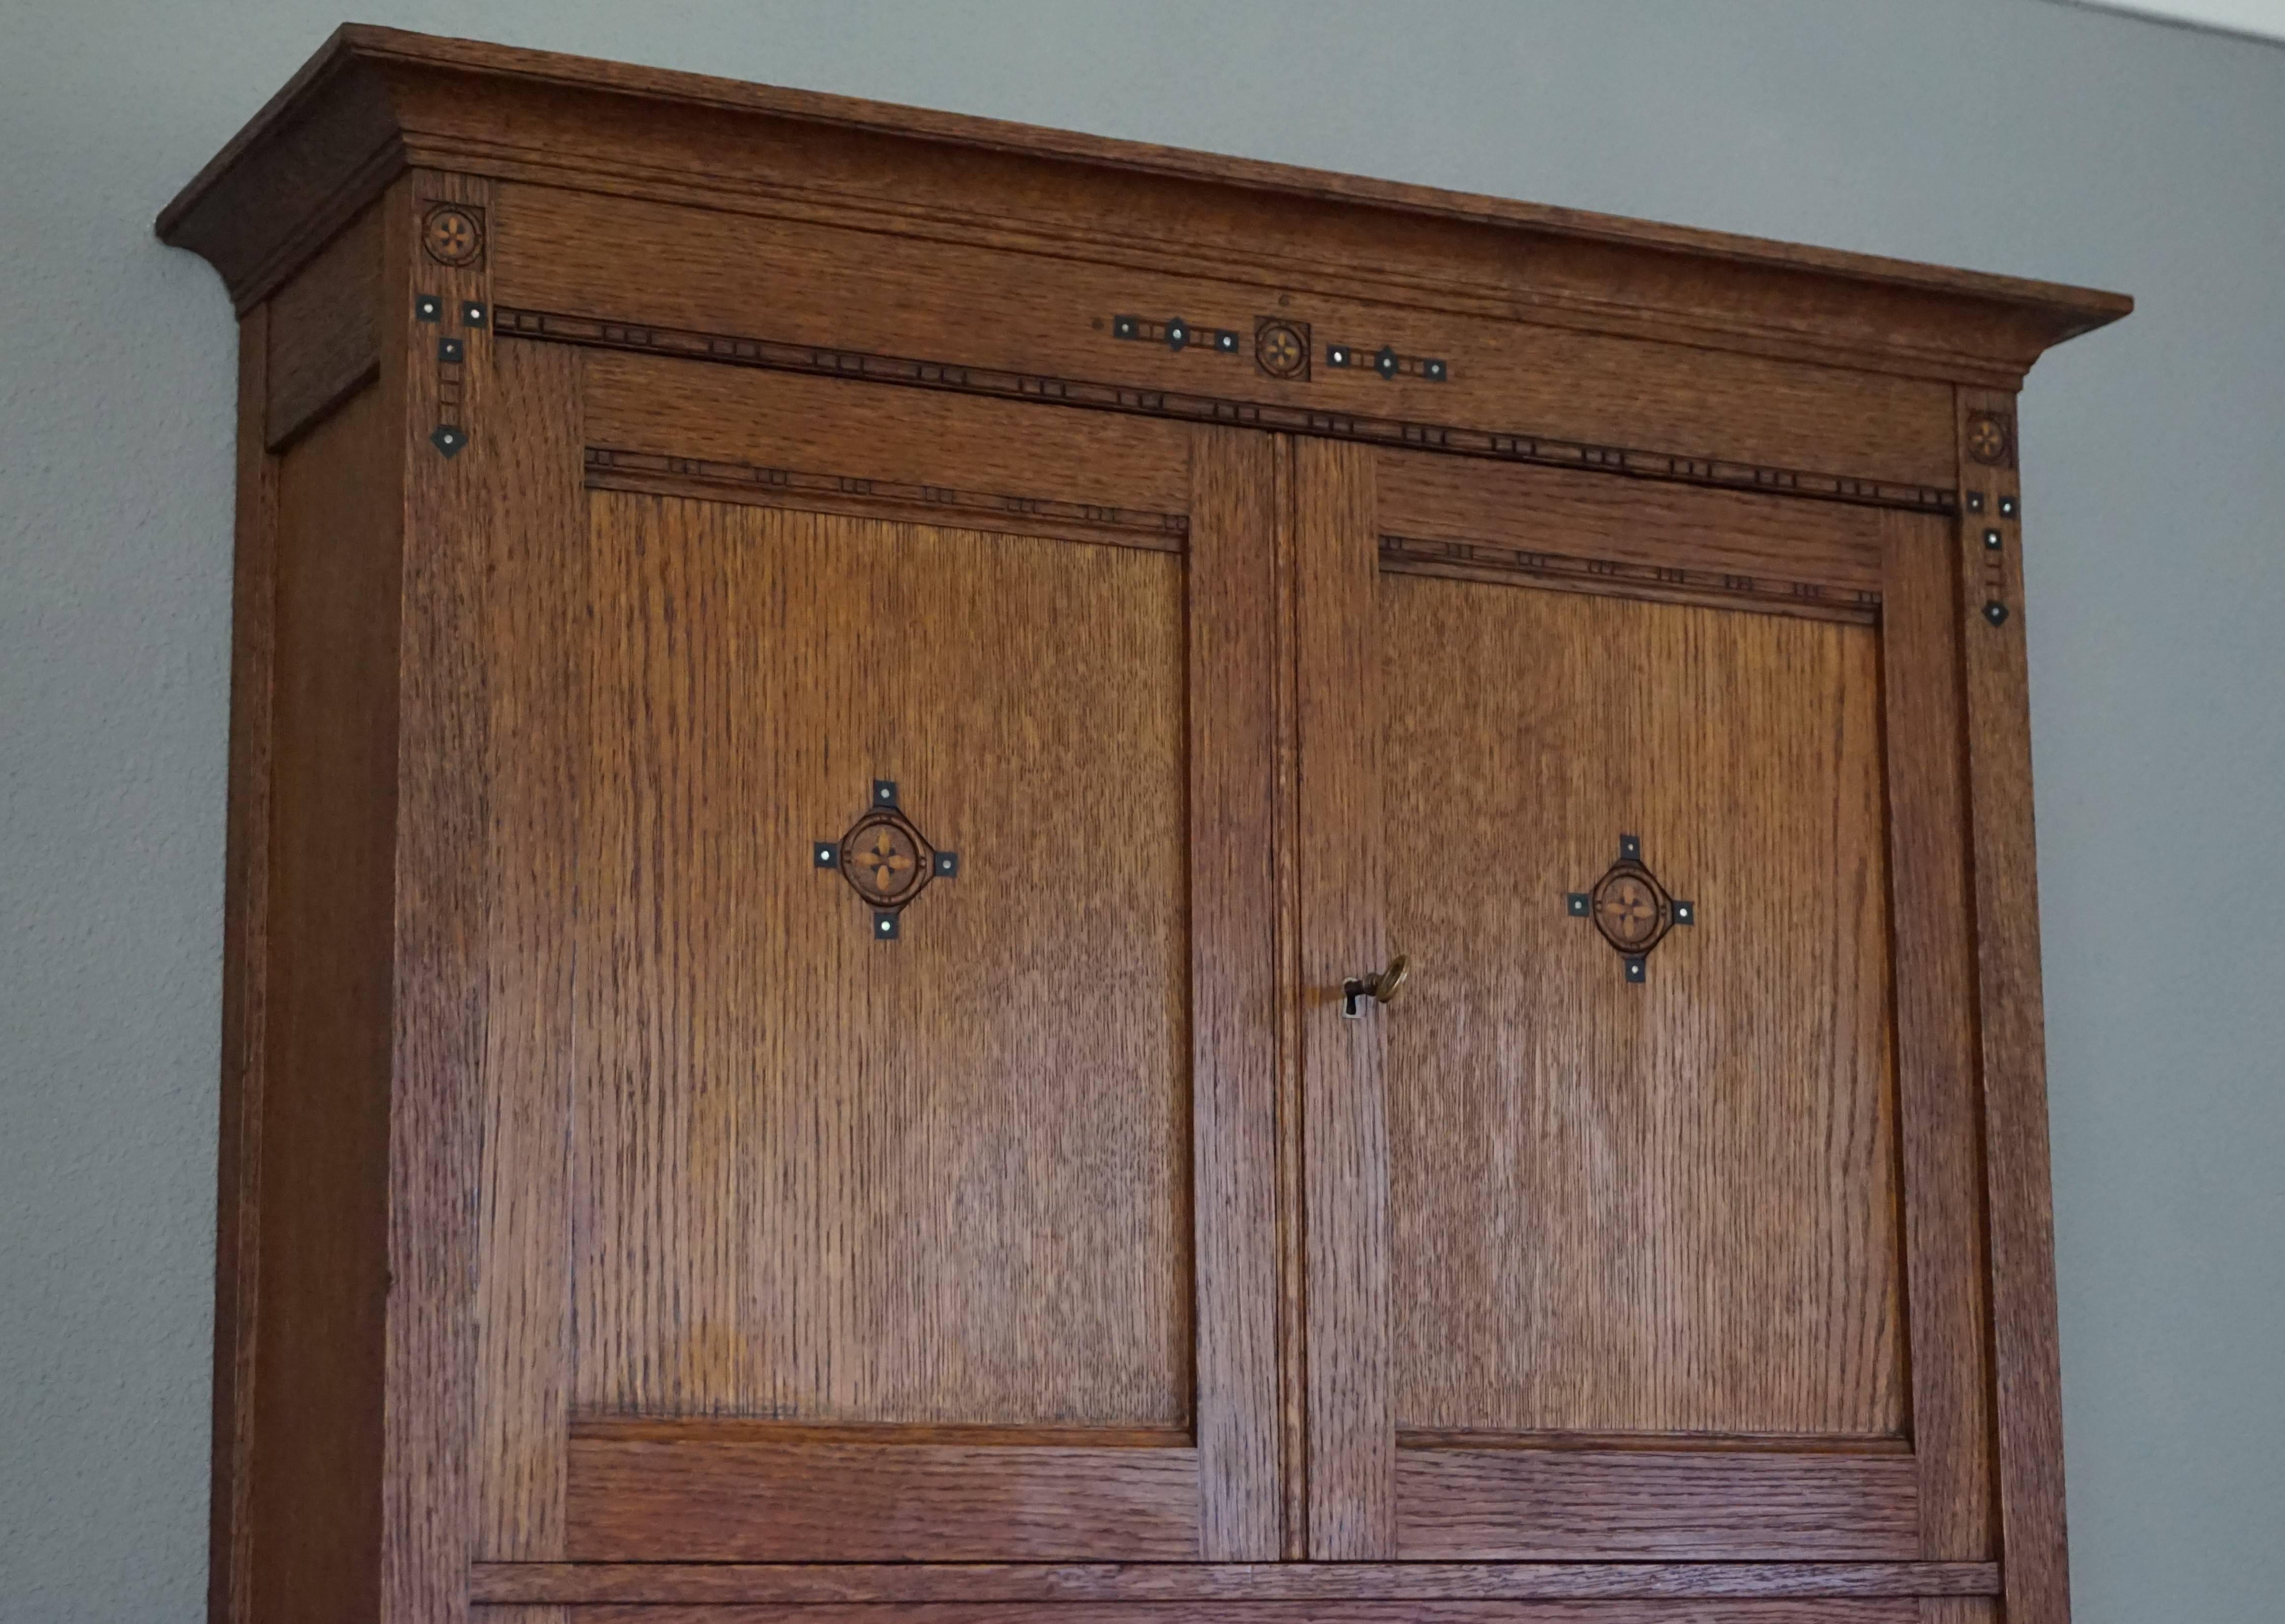 Top quality and great condition wall cabinet with maker's name.

This amazing quality and top condition wall cabinet dates back to 1900-1910 and we are certain you will never find another one. This unique antique is entirely made of solid oak and